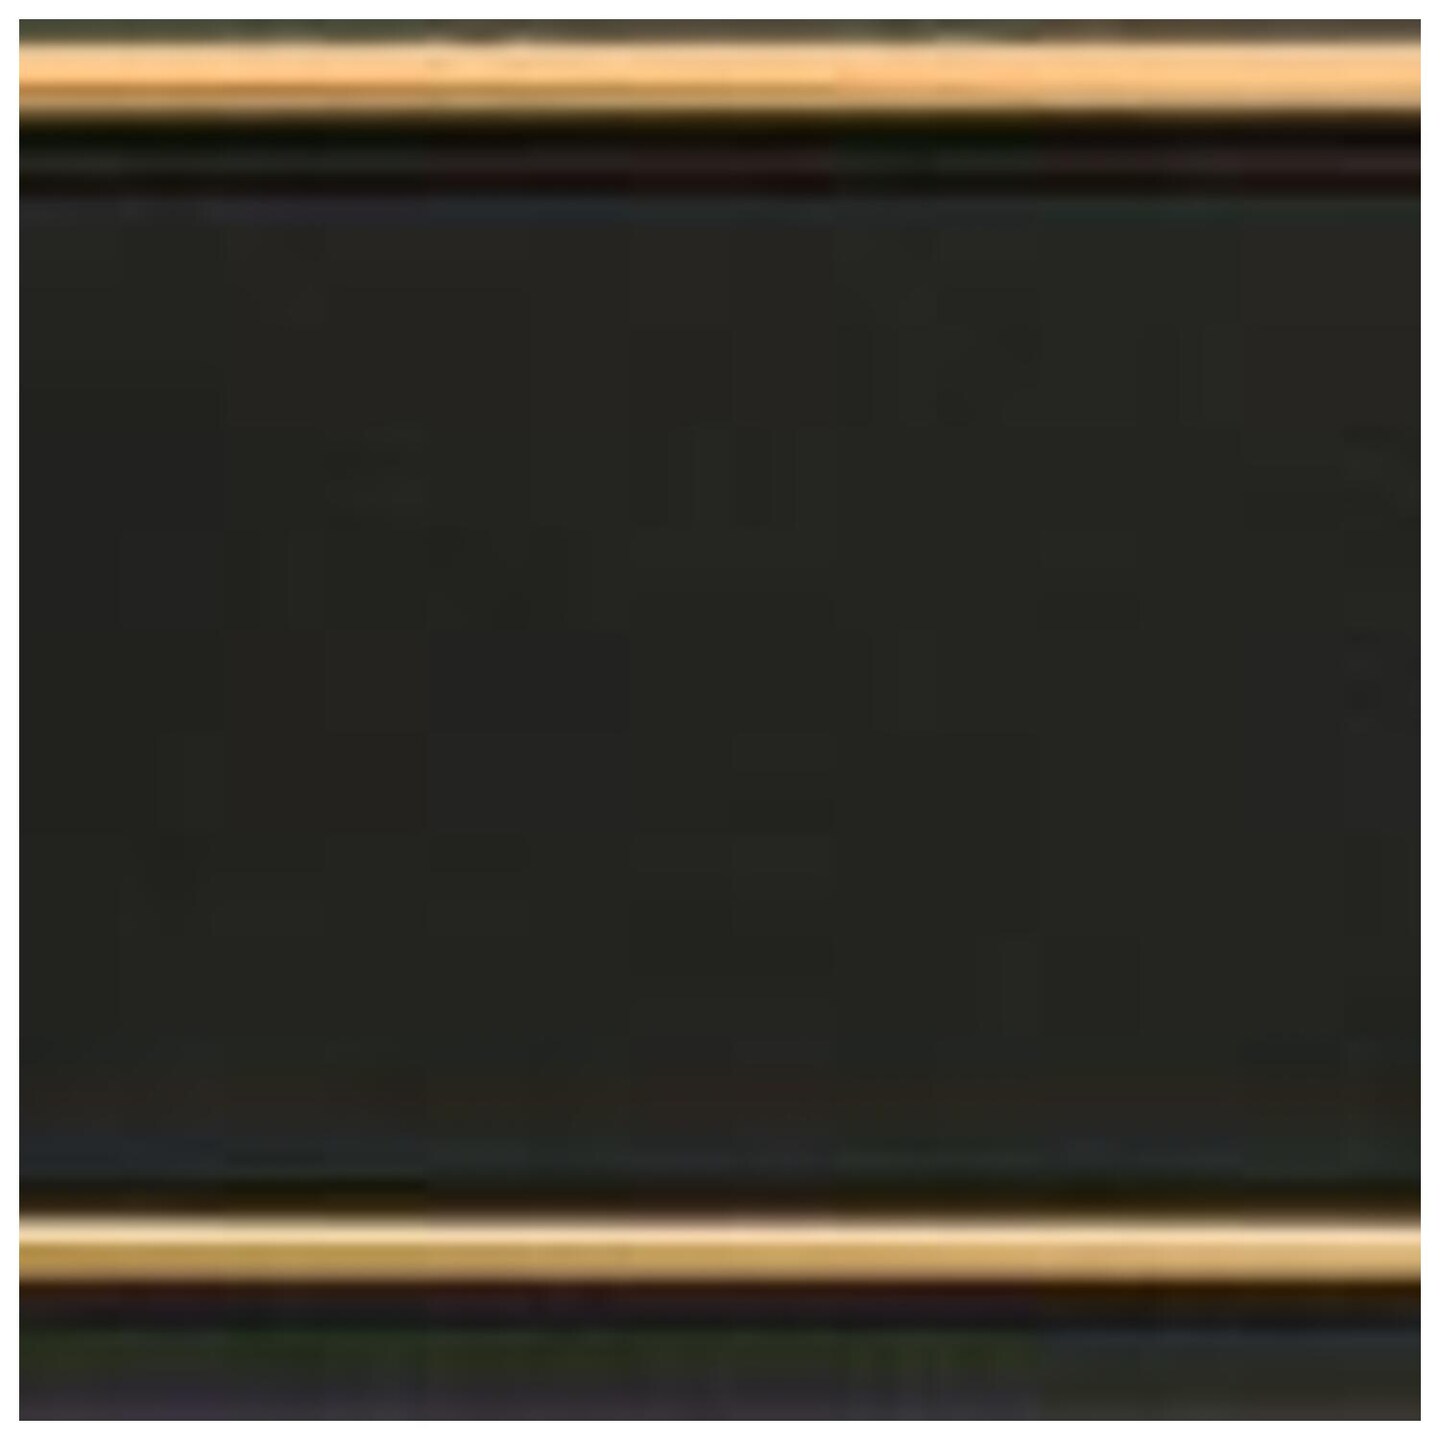 ArtToFrames 8.5x11 inch Diploma Frame with Tassel Opening - Framed with Black and Gold Mats, Comes with Regular Glass and Sawtooth Hanger for Wall Hanging (DT-8.5x11)